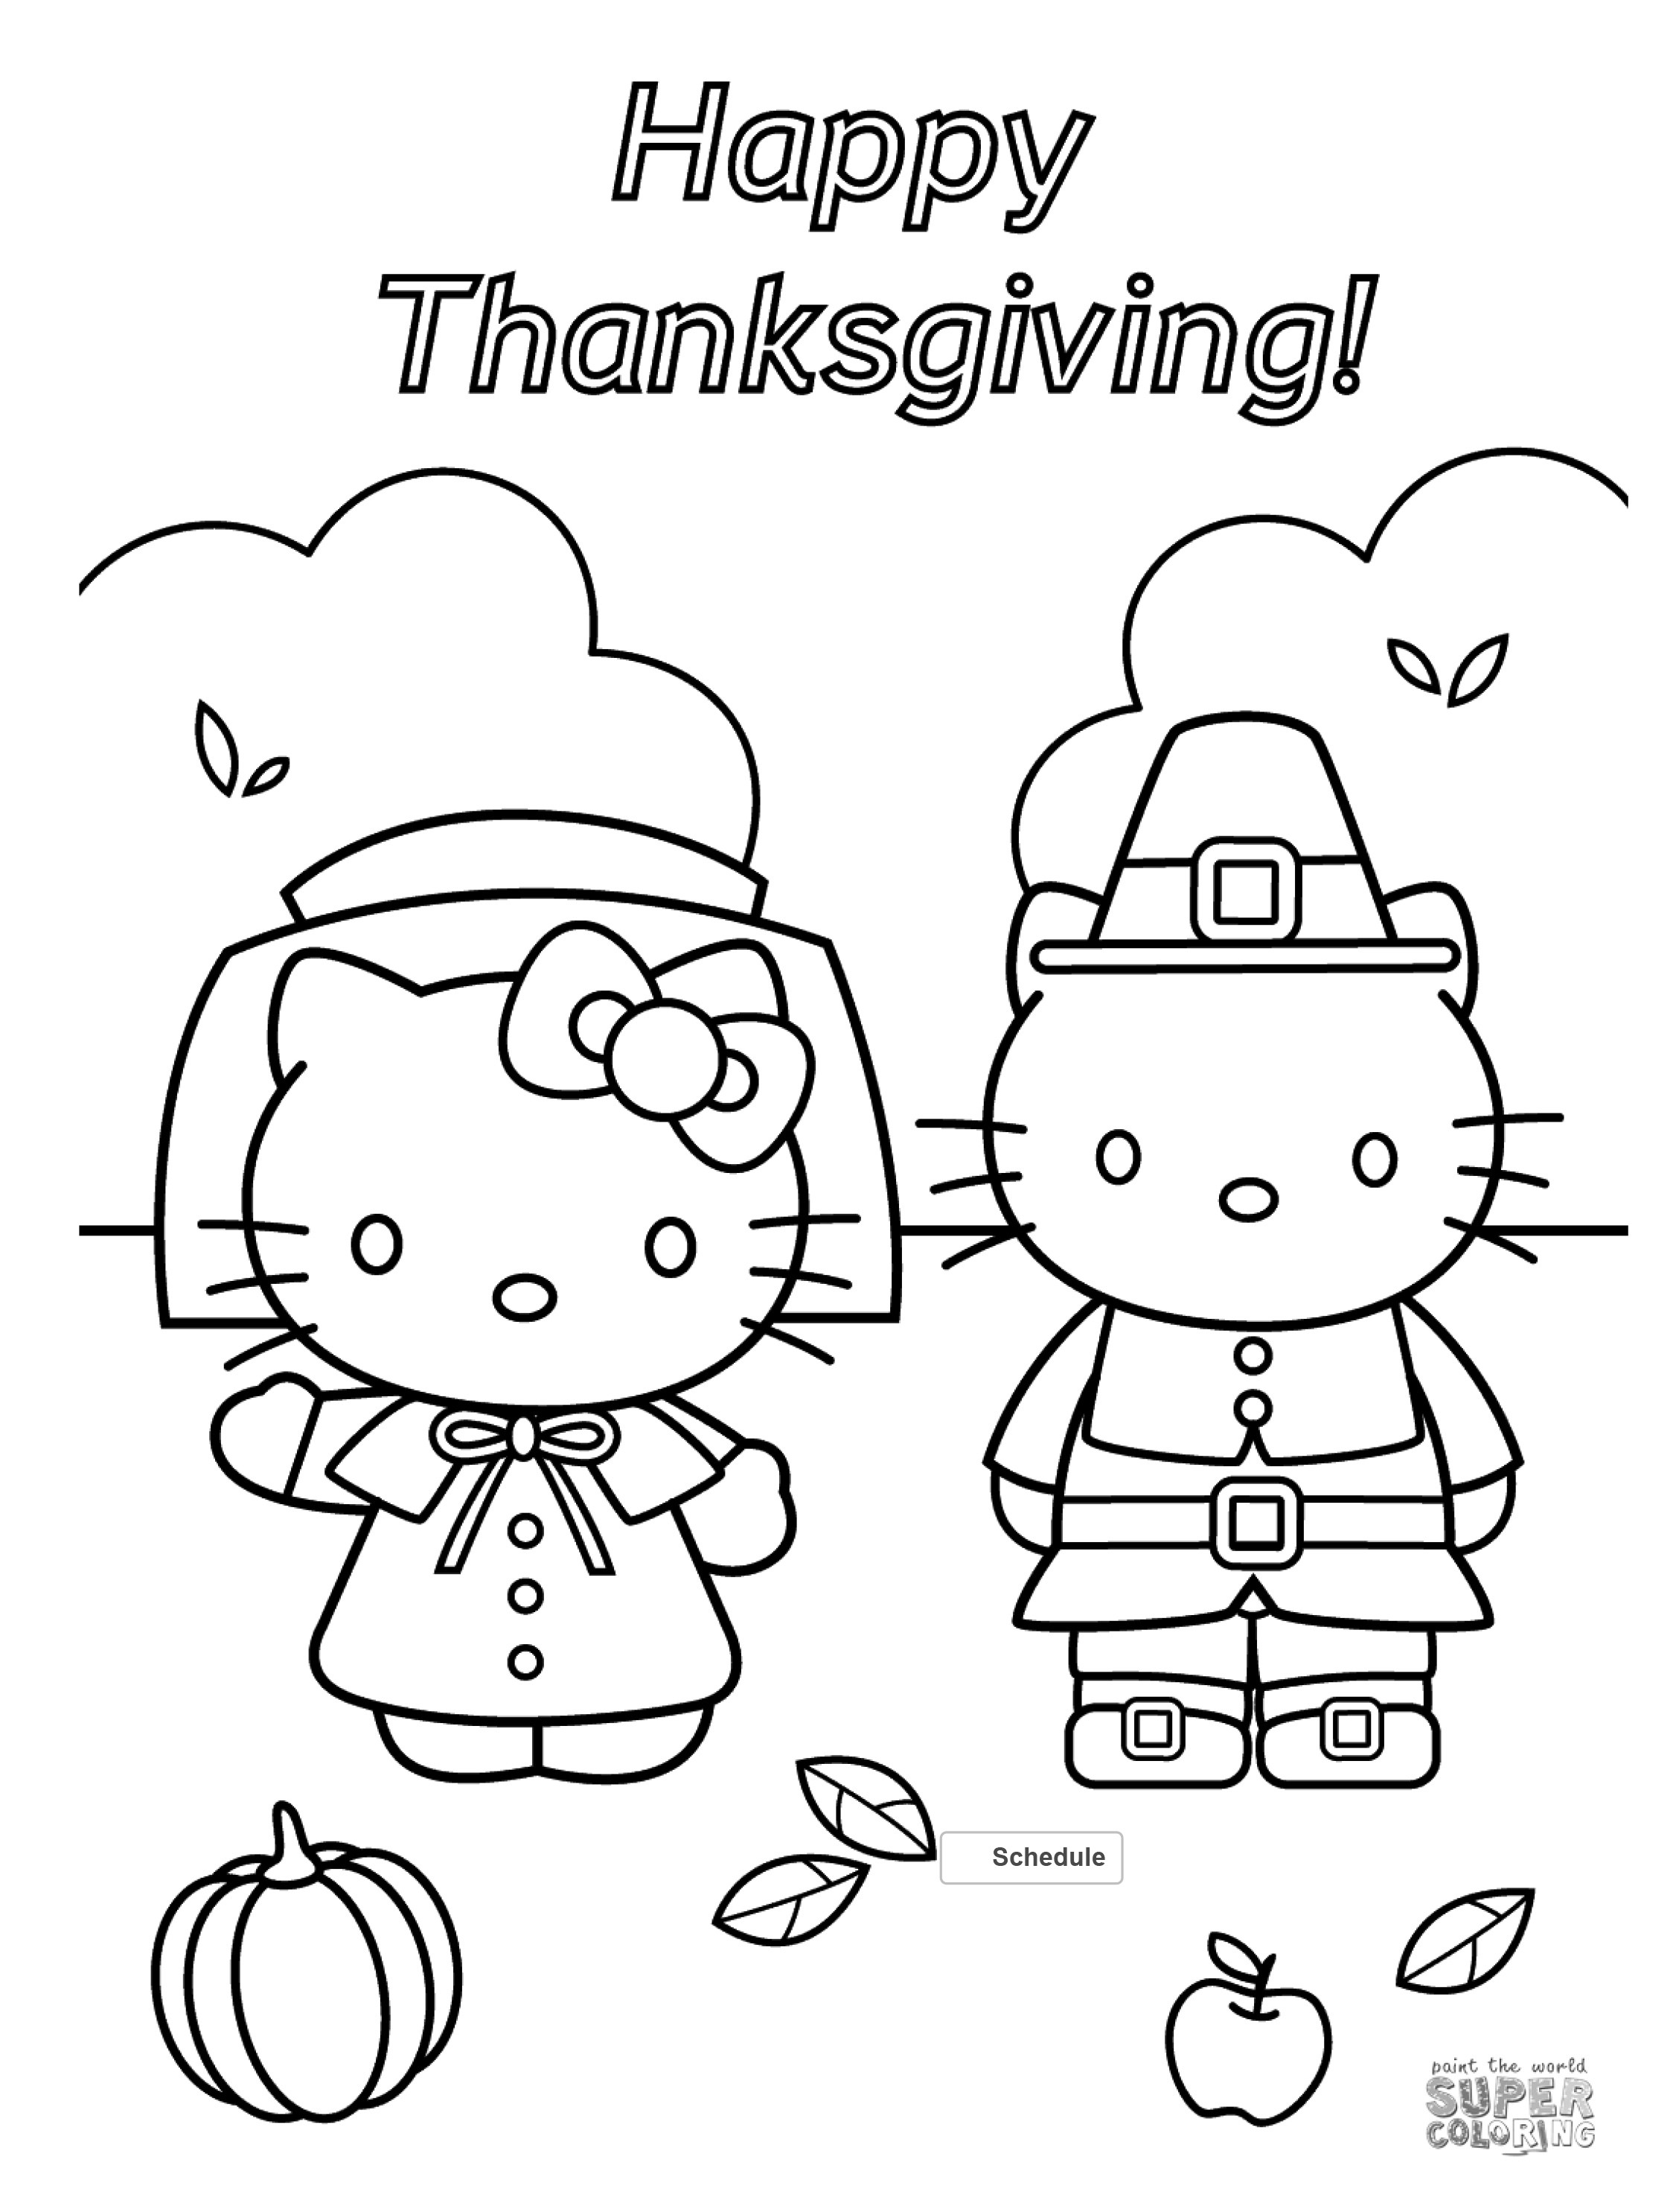 Free Thanksgiving Coloring Pages To Print
 FREE Thanksgiving Coloring Pages for Adults & Kids